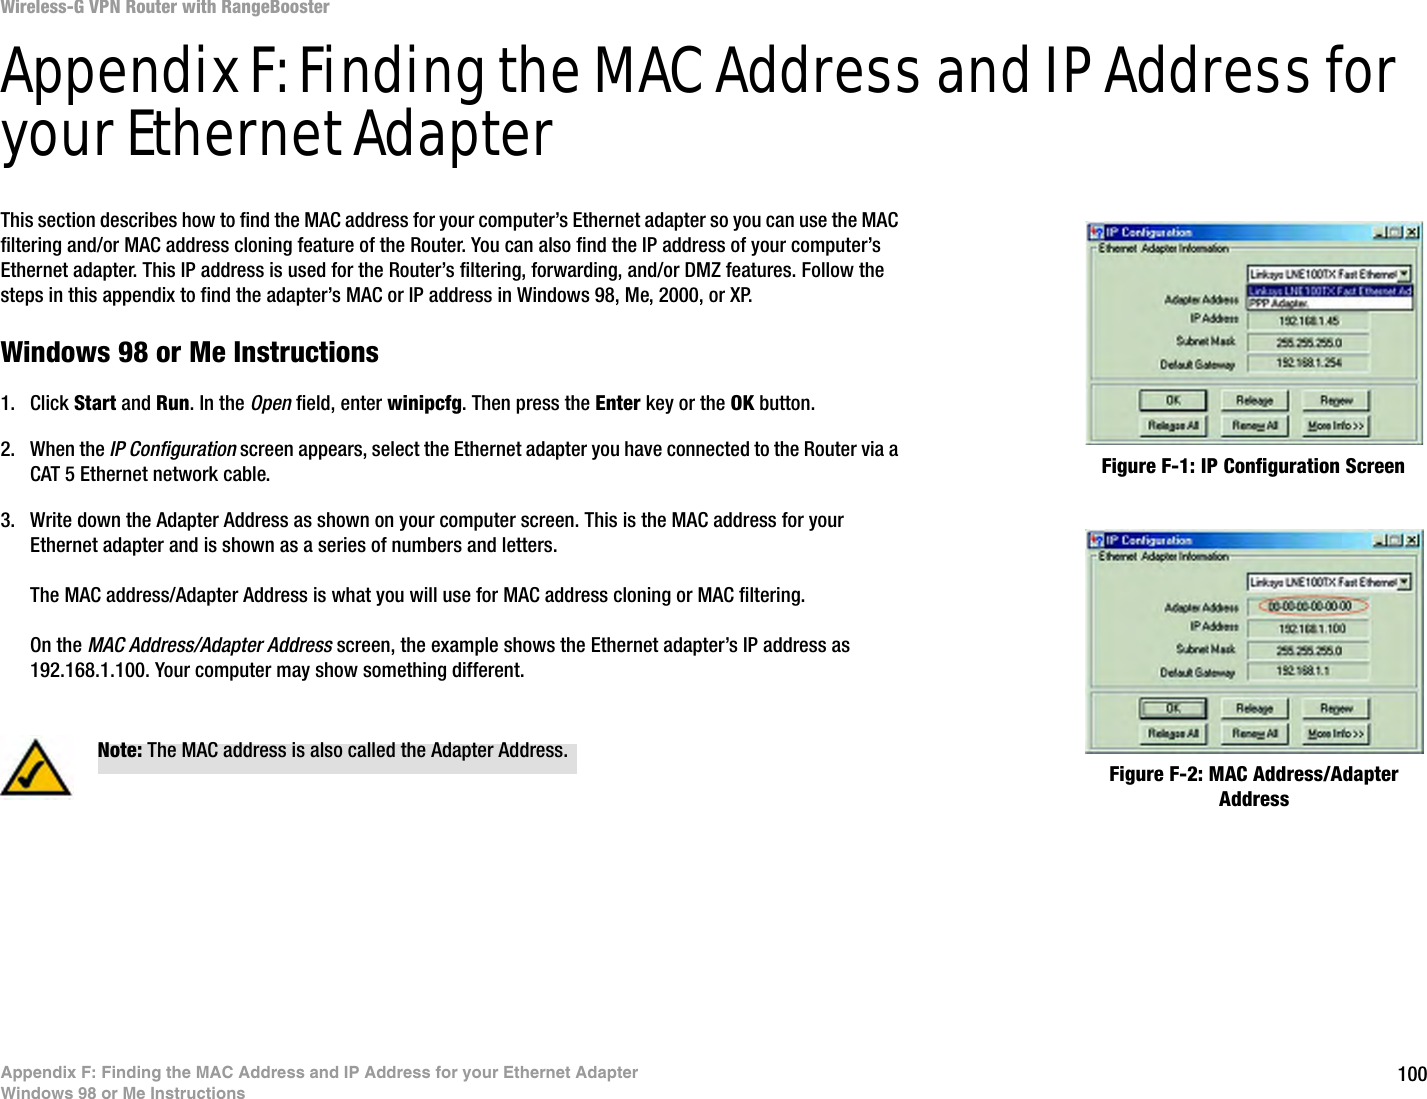 100Appendix F: Finding the MAC Address and IP Address for your Ethernet AdapterWindows 98 or Me InstructionsWireless-G VPN Router with RangeBoosterAppendix F: Finding the MAC Address and IP Address for your Ethernet AdapterThis section describes how to find the MAC address for your computer’s Ethernet adapter so you can use the MAC filtering and/or MAC address cloning feature of the Router. You can also find the IP address of your computer’s Ethernet adapter. This IP address is used for the Router’s filtering, forwarding, and/or DMZ features. Follow the steps in this appendix to find the adapter’s MAC or IP address in Windows 98, Me, 2000, or XP.Windows 98 or Me Instructions1. Click Start and Run. In the Open field, enter winipcfg. Then press the Enter key or the OK button. 2. When the IP Configuration screen appears, select the Ethernet adapter you have connected to the Router via a CAT 5 Ethernet network cable.3. Write down the Adapter Address as shown on your computer screen. This is the MAC address for your Ethernet adapter and is shown as a series of numbers and letters.The MAC address/Adapter Address is what you will use for MAC address cloning or MAC filtering.On the MAC Address/Adapter Address screen, the example shows the Ethernet adapter’s IP address as 192.168.1.100. Your computer may show something different.Figure F-2: MAC Address/Adapter AddressFigure F-1: IP Configuration ScreenNote: The MAC address is also called the Adapter Address.